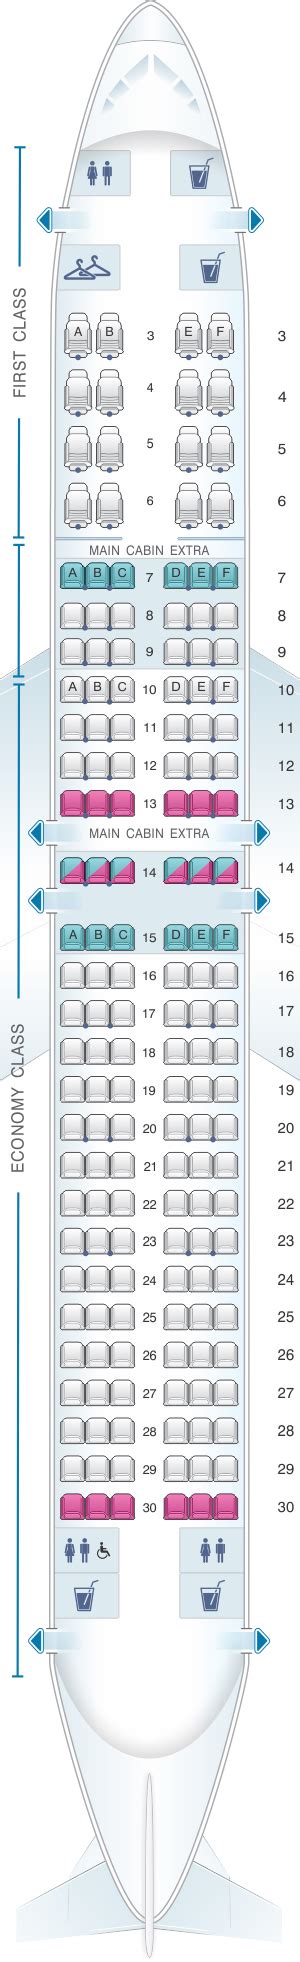 Economy. Seats 189. Pitch 29-30". Width 17". Recline 3". The Boeing 737-800 series, offers an economy class that's optimized for longer regional routes. Catering to 189 passengers, the environment is spacious with ergonomic seating. A wide range of entertainment options is available, and the crew remains attentive to passenger needs, ensuring a ...